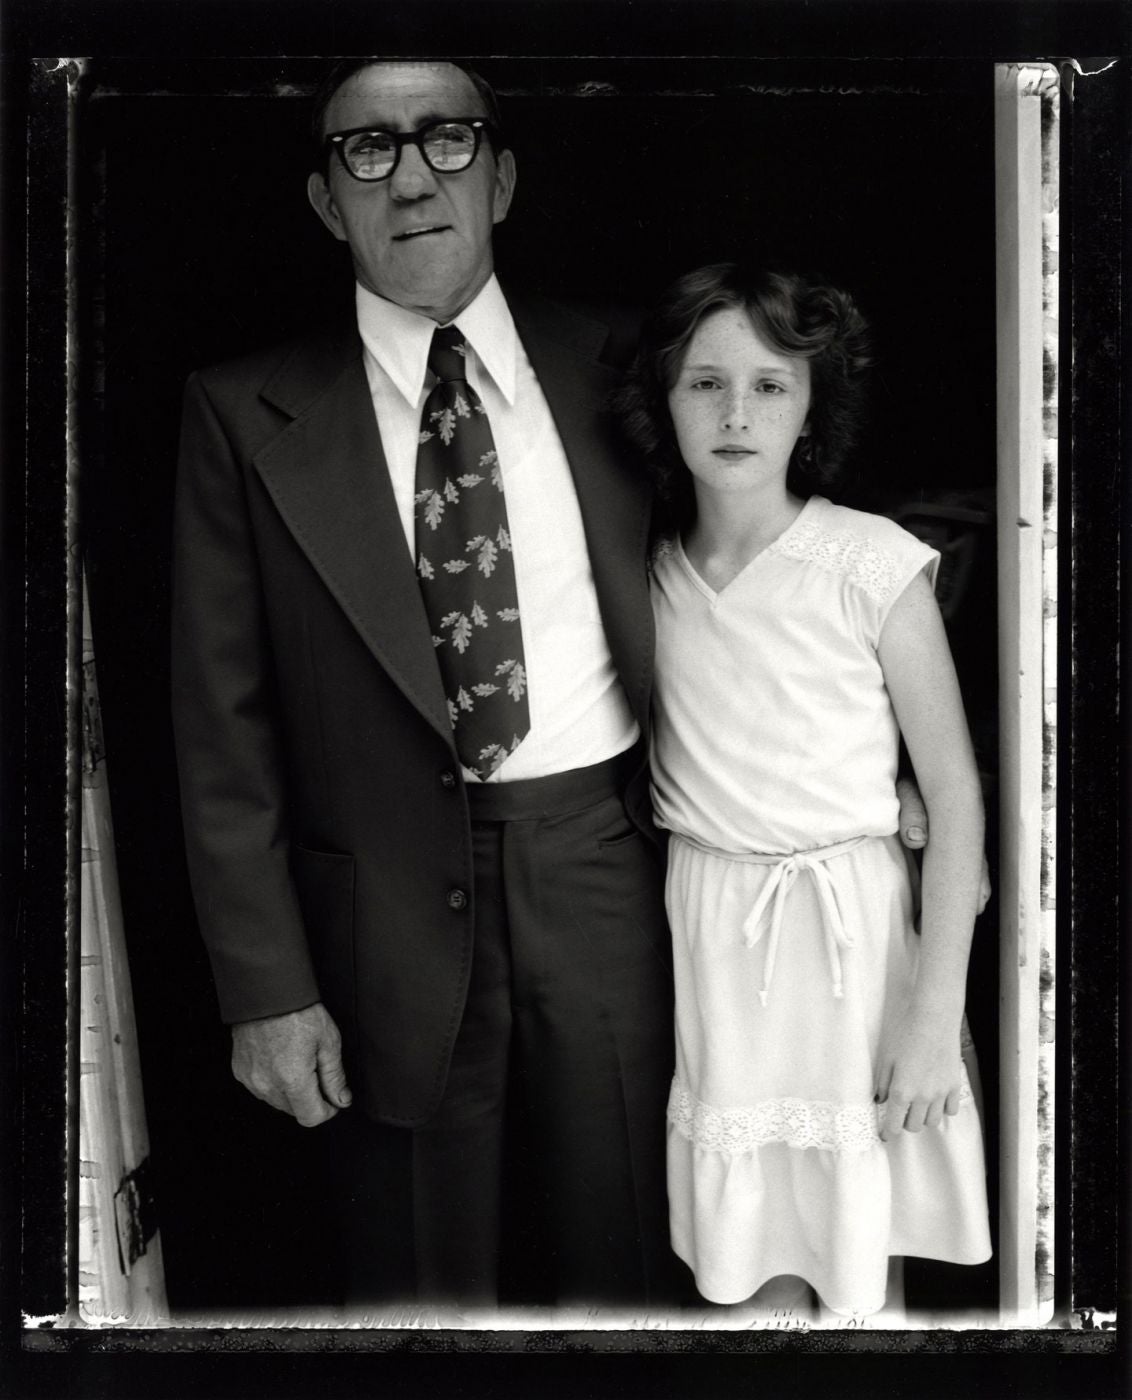 Bill Burke: "Reverend Robert Elkins and Niece, Church in Jesus Name, Jolo, West Virginia, 1979," Limited Edition Gelatin Silver Print (Open Edition; Print Size 16x20")